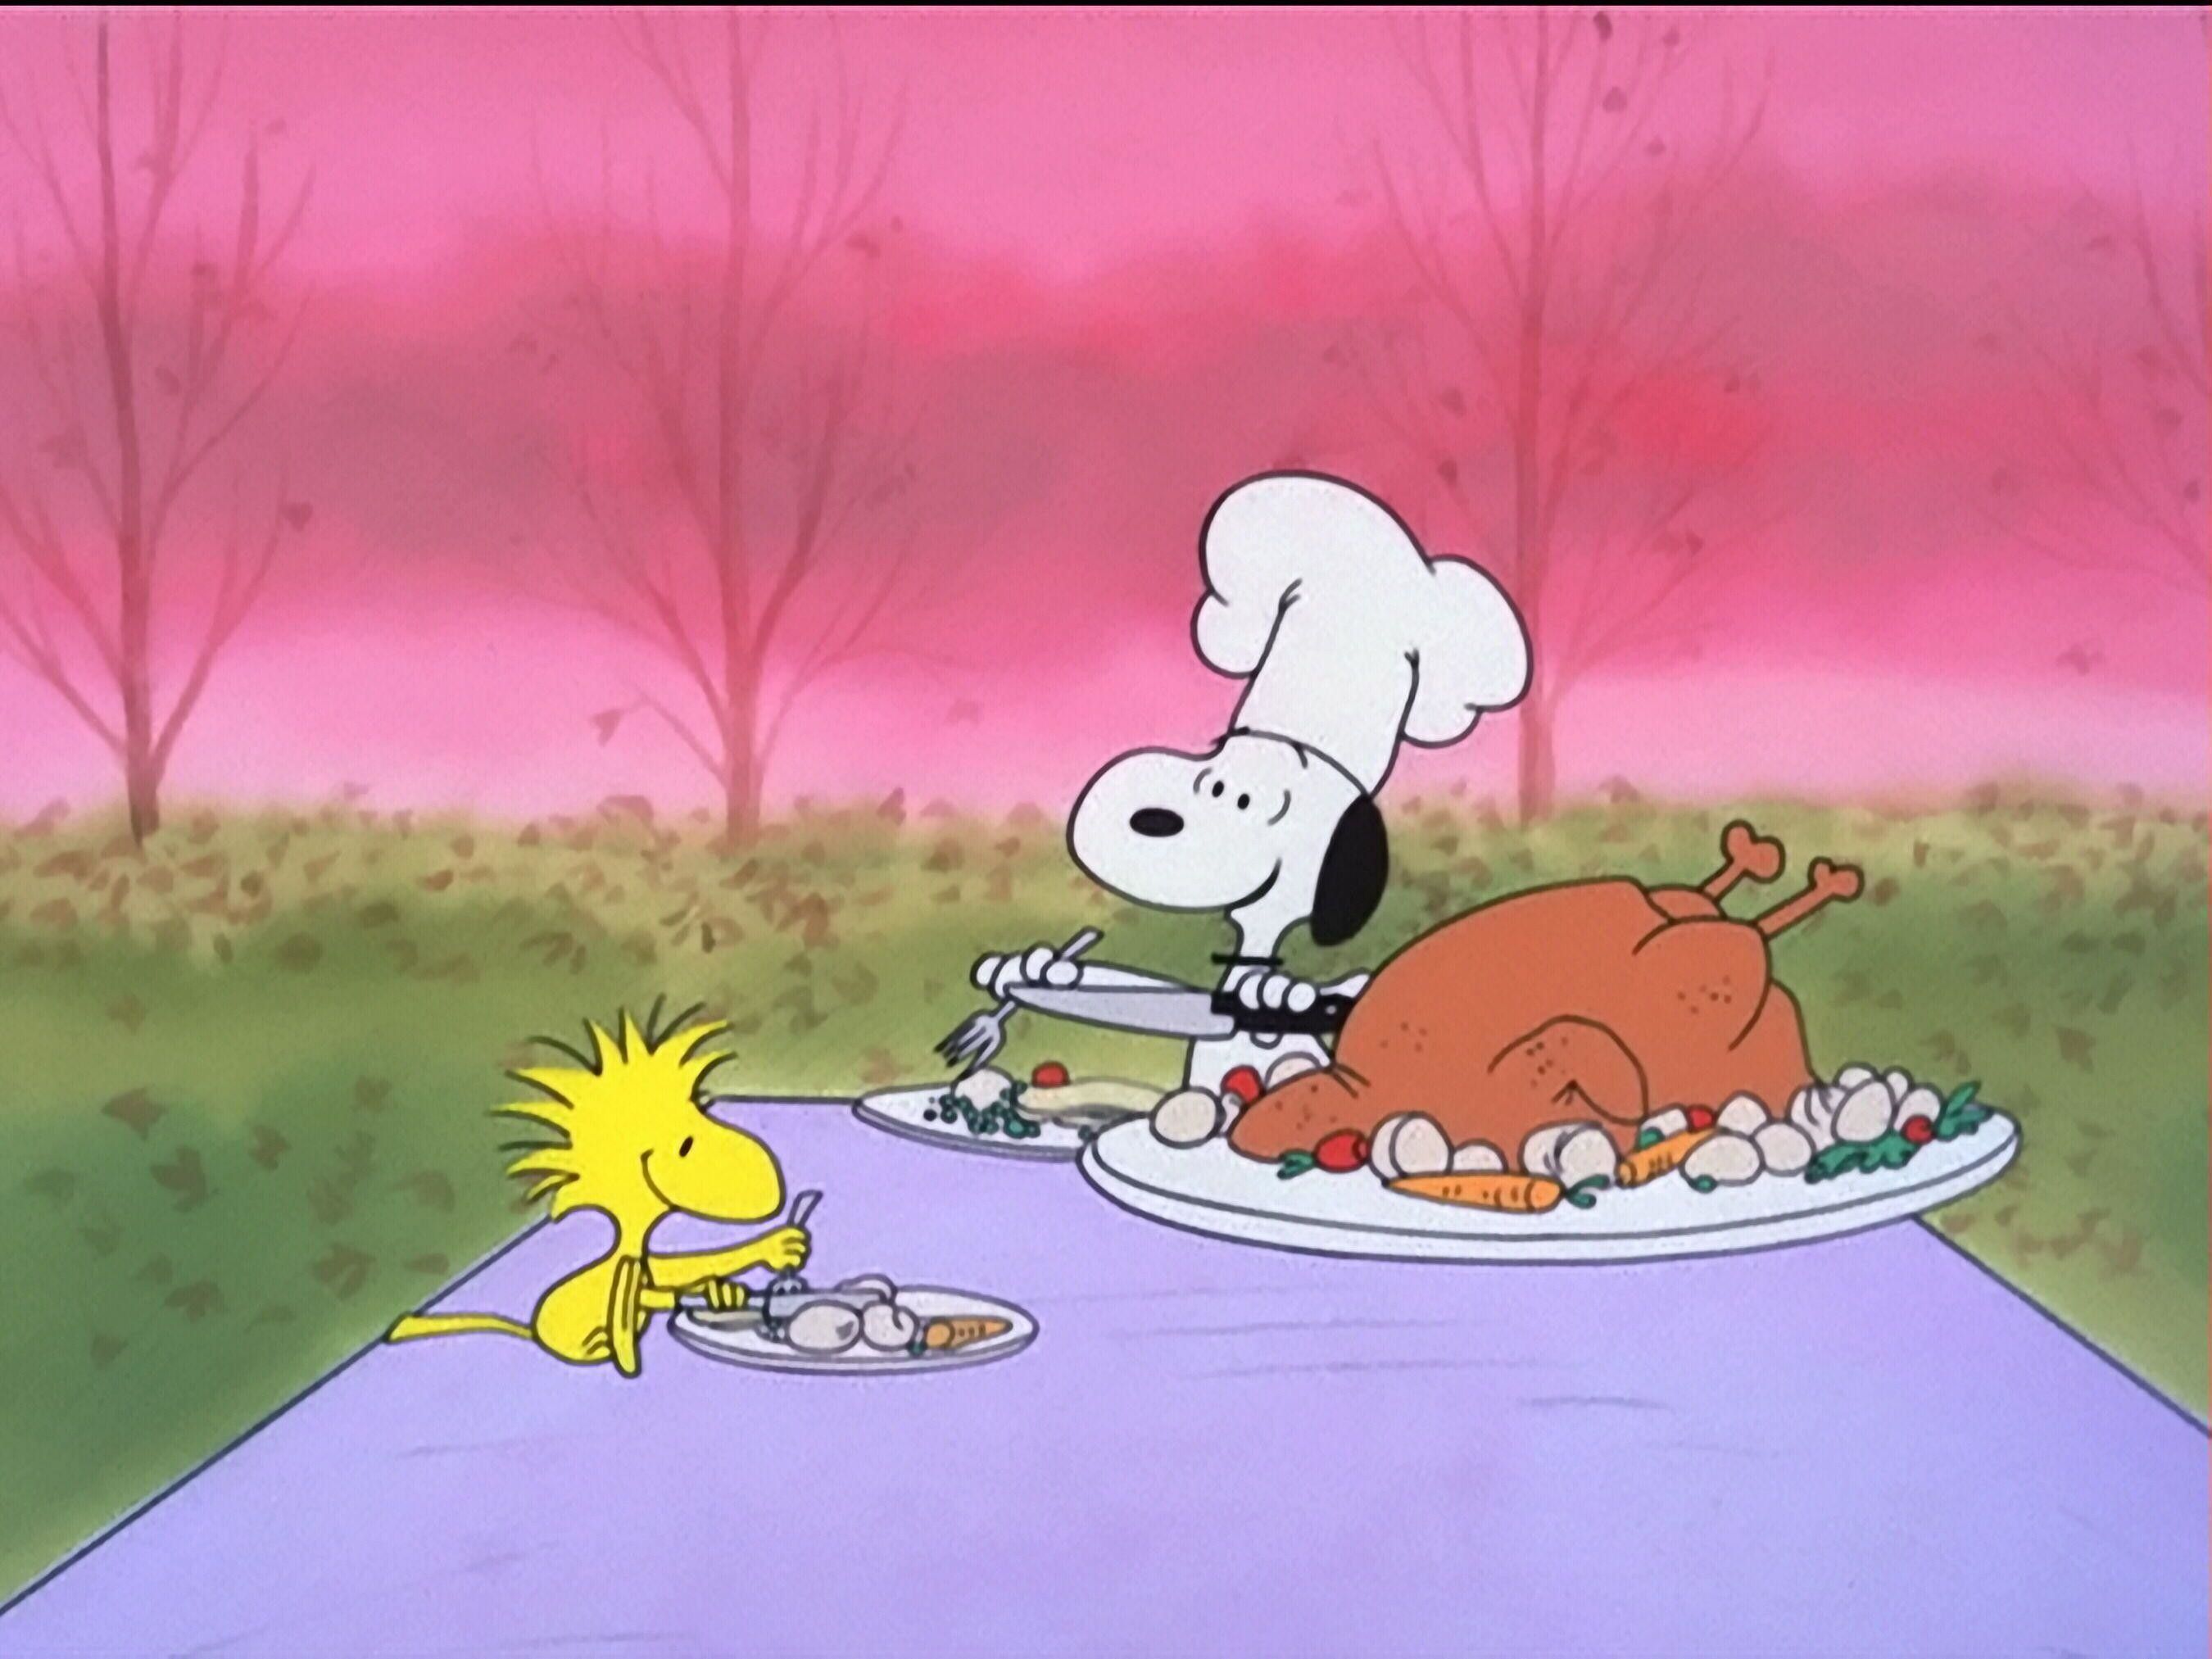 A cartoon character is sitting at the table with food - Charlie Brown